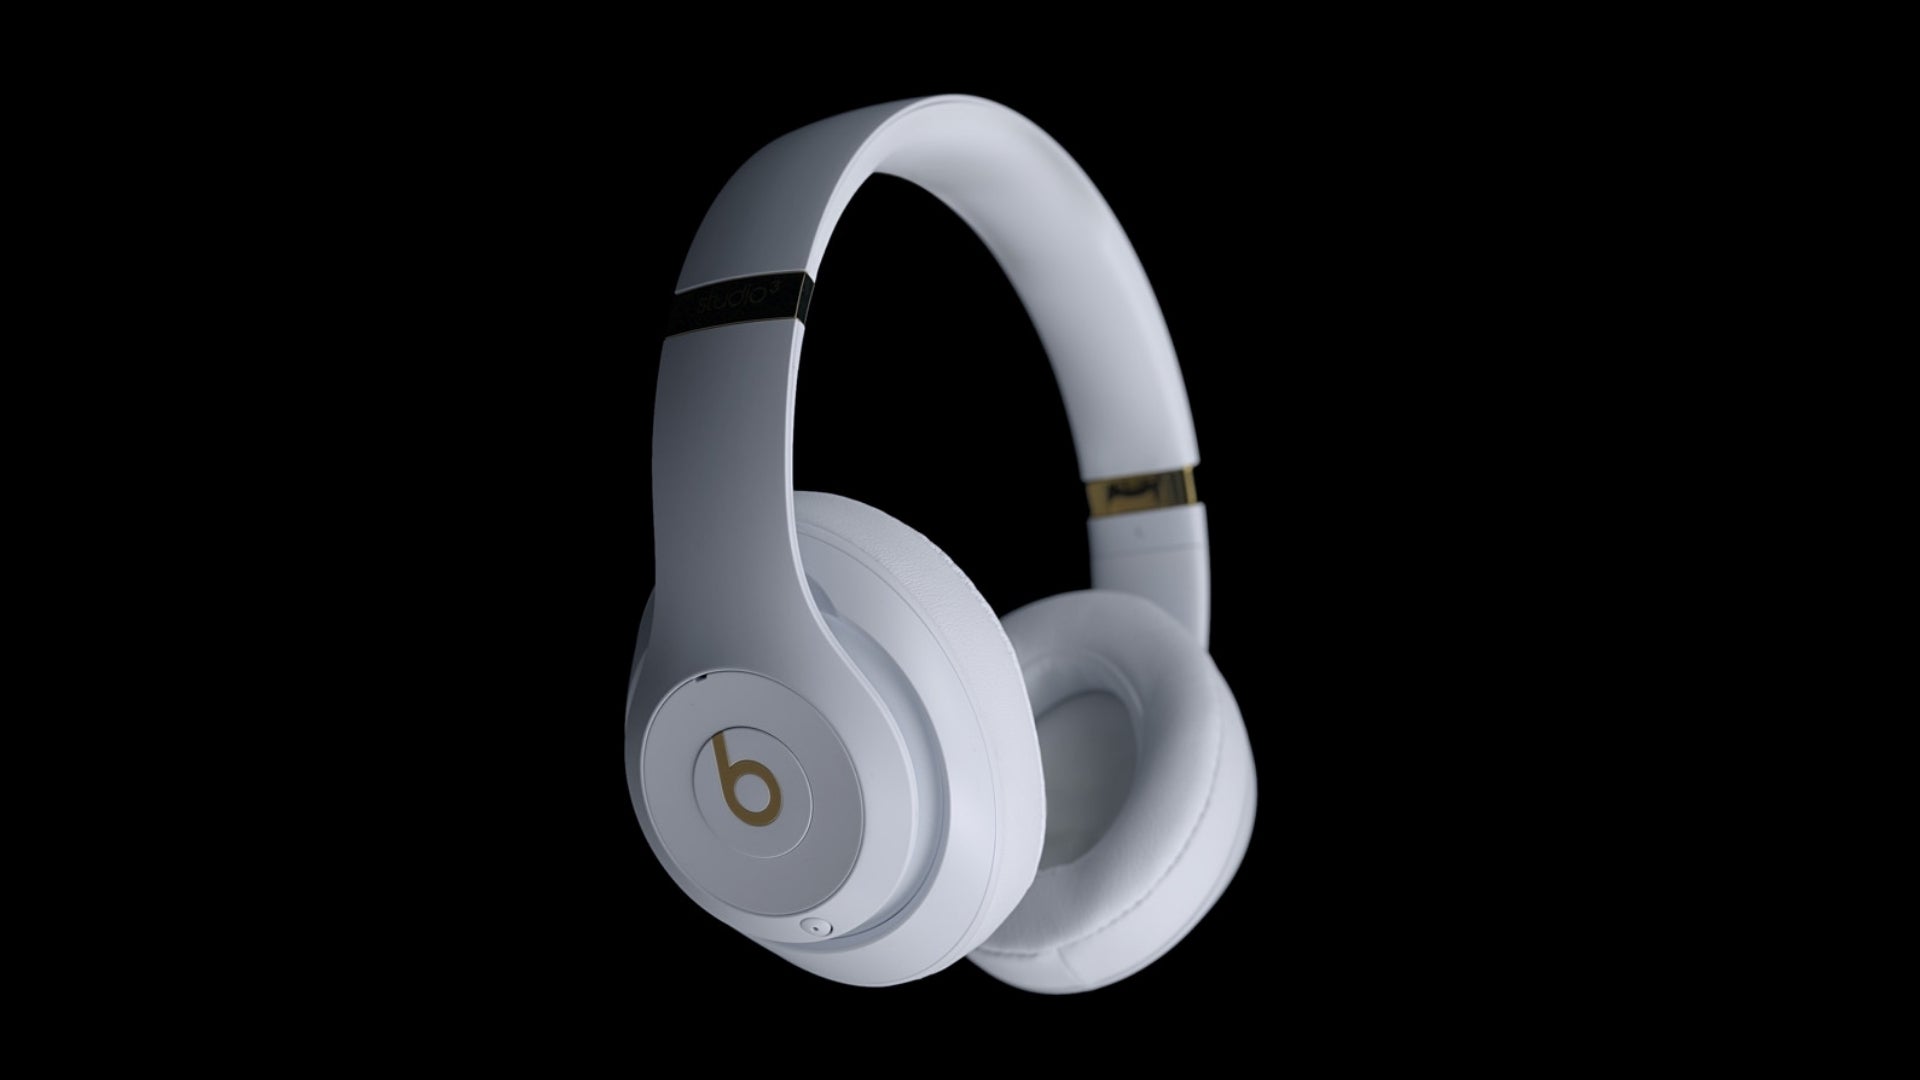  Beats Studio3 Wireless Noise Cancelling On-Ear Headphones -  Apple W1 Headphone Chip, Class 1 Bluetooth, Active Noise Cancelling, 22  Hours of Listening Time - Shadow Gray (Previous Model) : Electronics